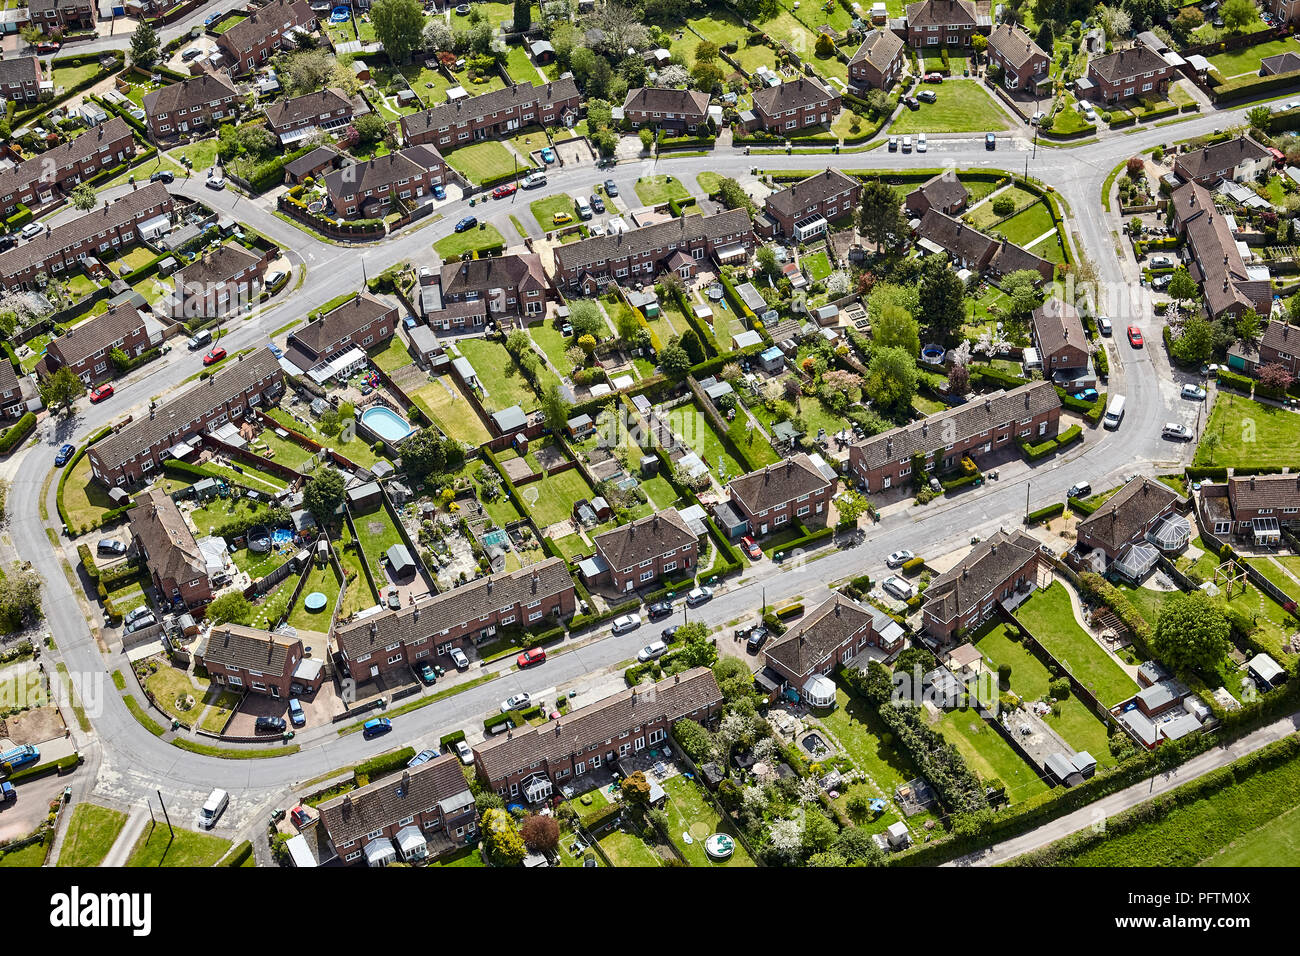 Aerial view of small housing estate, road layout, town planning, UK. Stock Photo